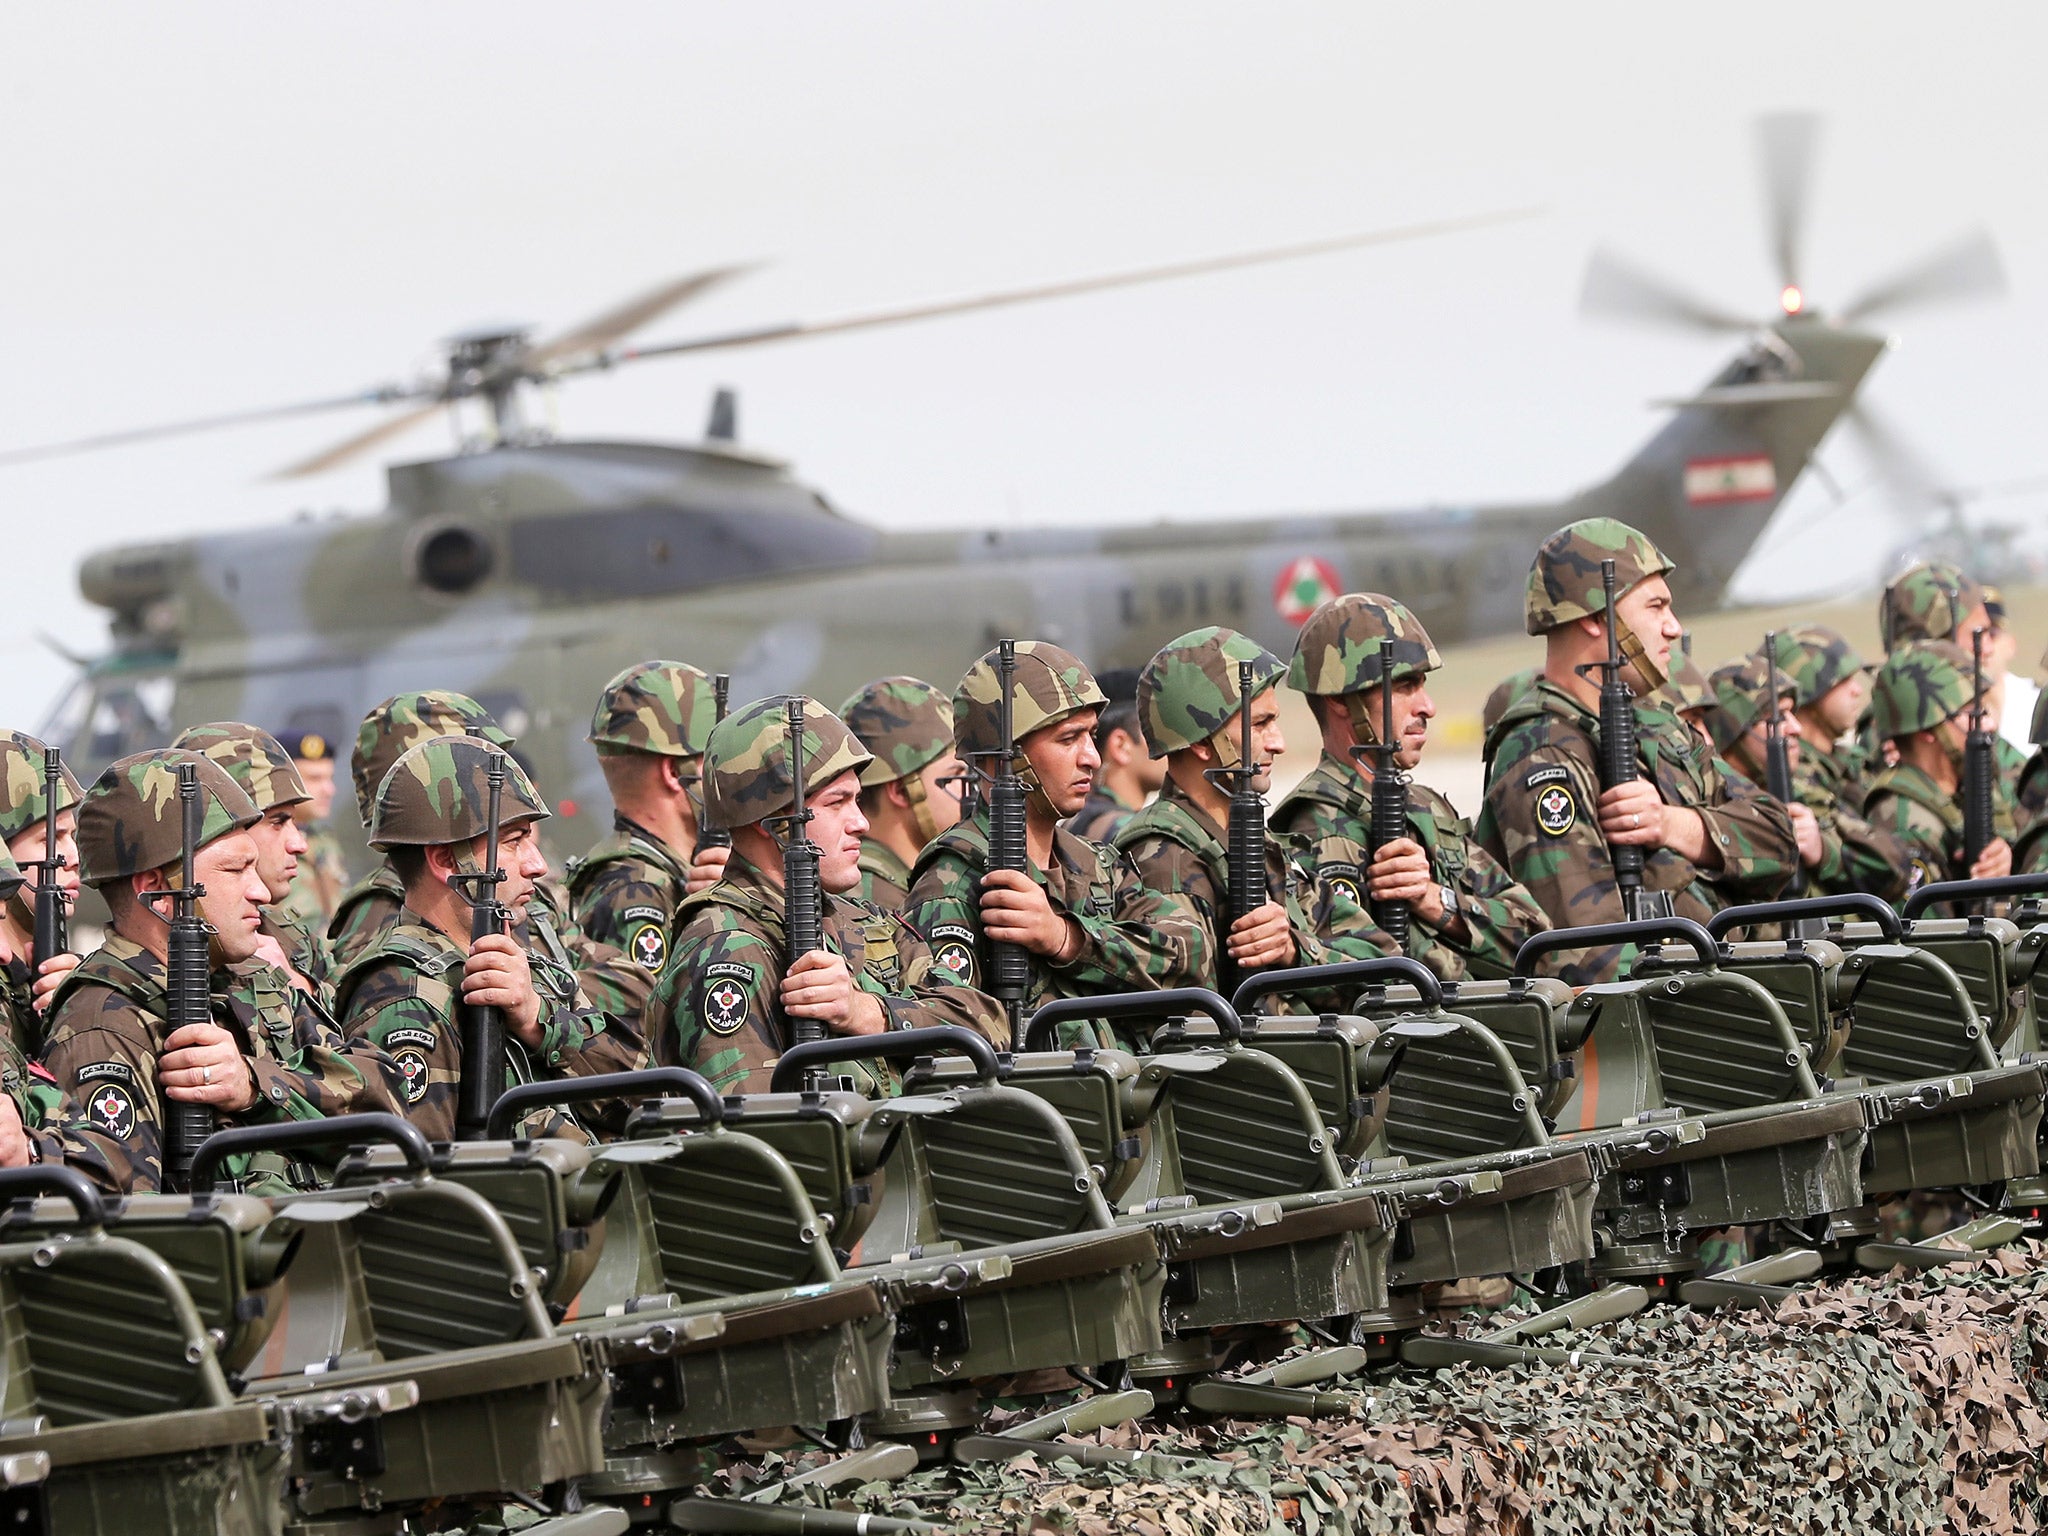 Saudi Arabia is withdrawing from funding a weapons project for the Lebanese army